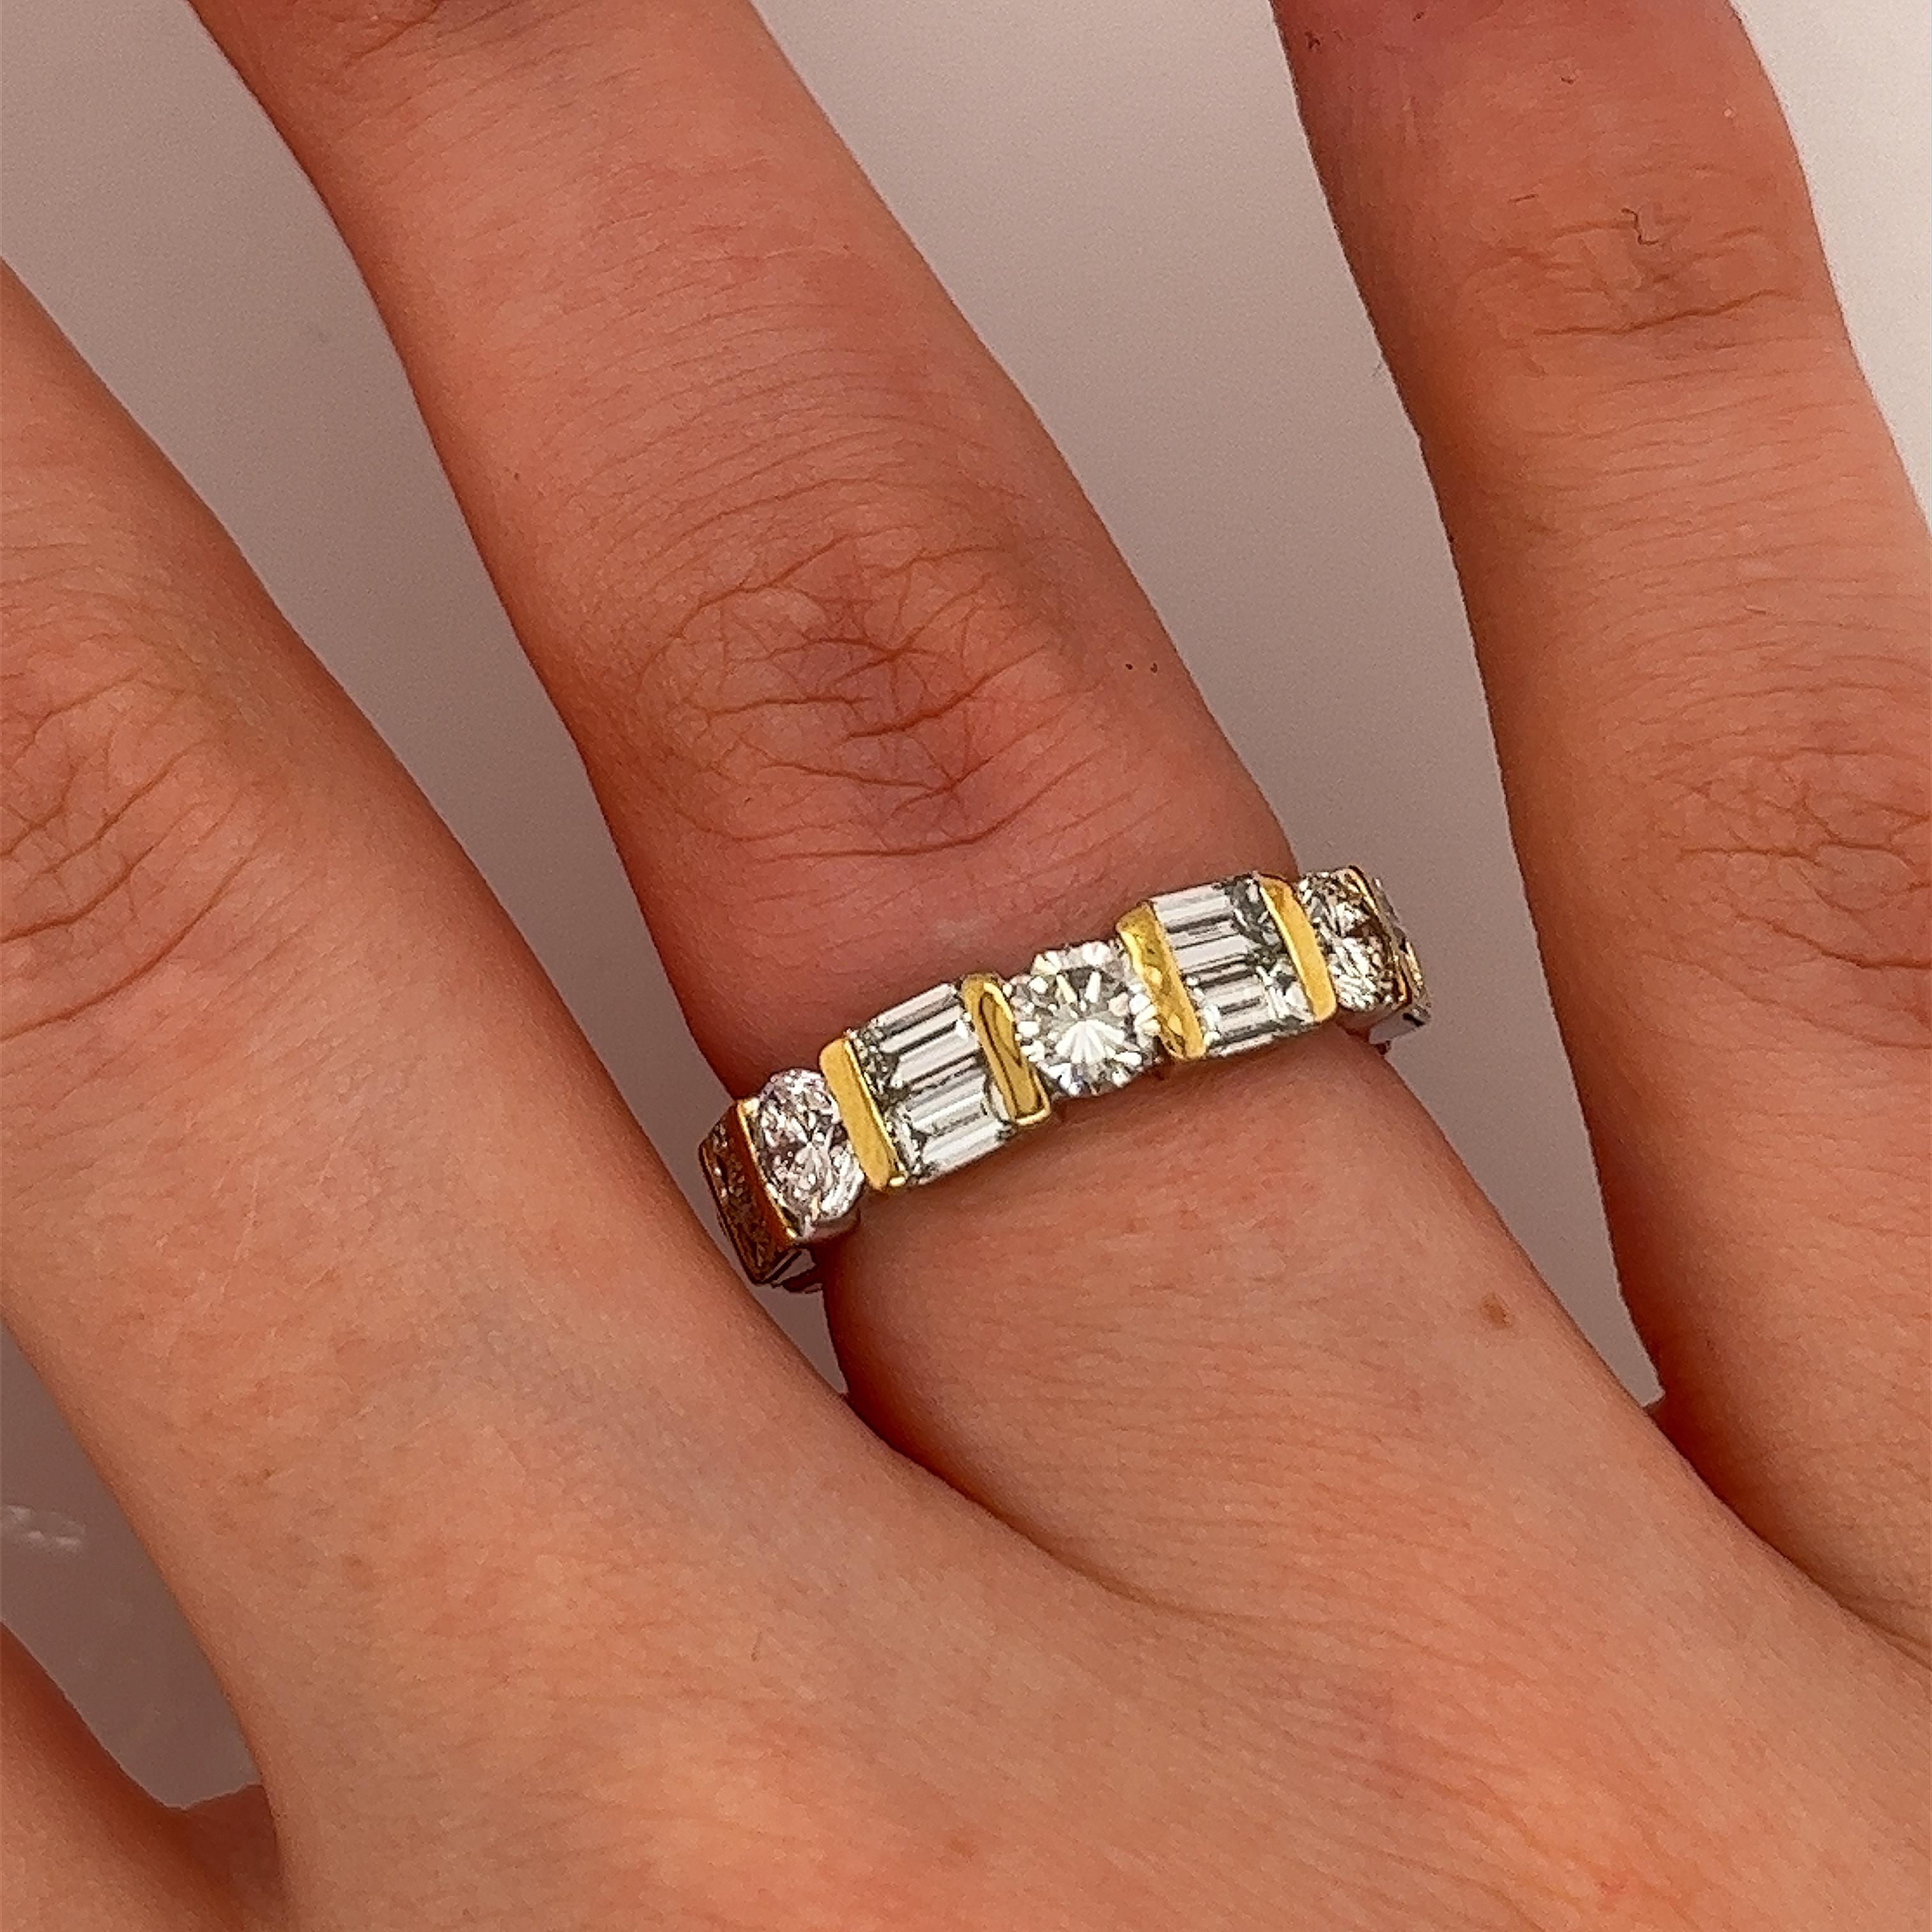 Round Cut 14ct White &Yellow Gold Diamond Full eternity ring set with 7 Round &14 baguette